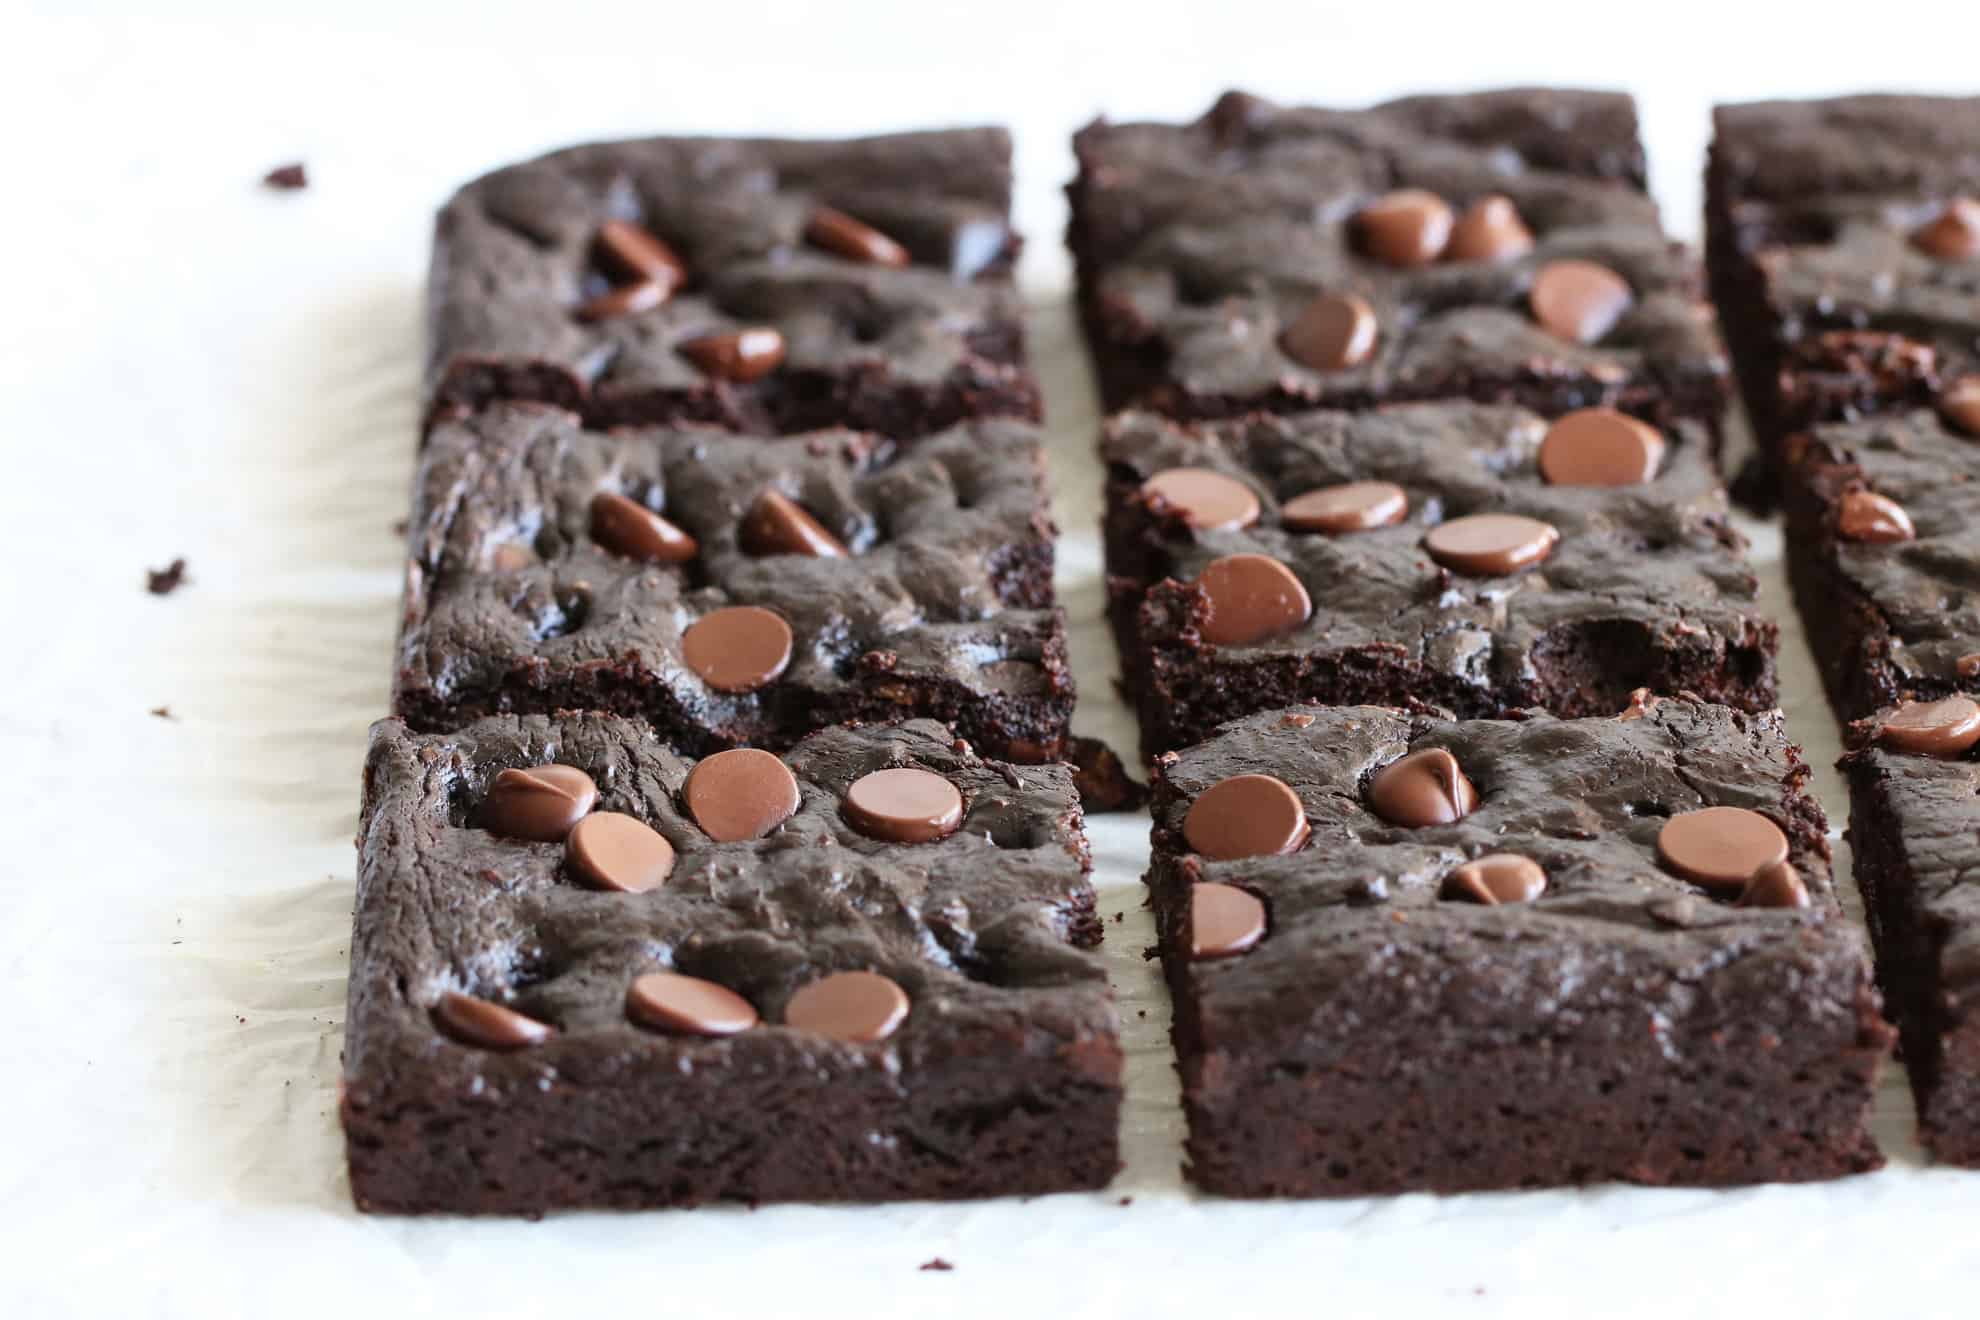 This is a side view of healthy avocado brownies with chocolate chips on the tops. The brownies are on a white surface and one brownie square has a bite taken out of it. 